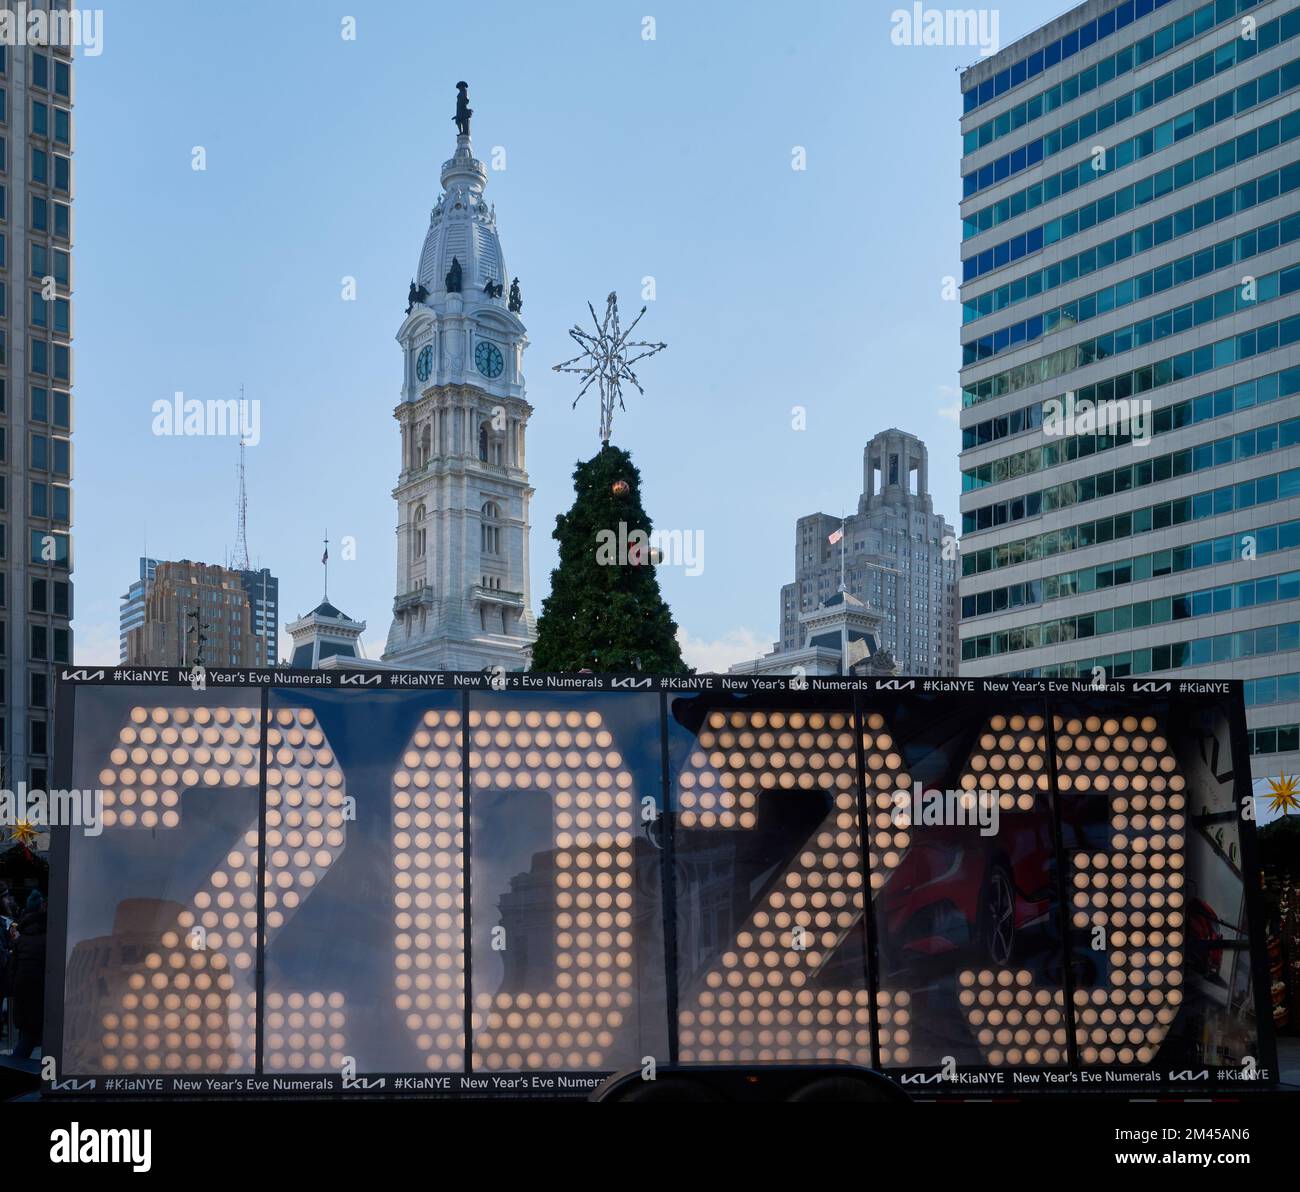 PHILADELPHIA, PA, USA - DECEMBER 18, 2022: Times Square New Year's Eve 2023 Numerals at Christmas Village. Stock Photo